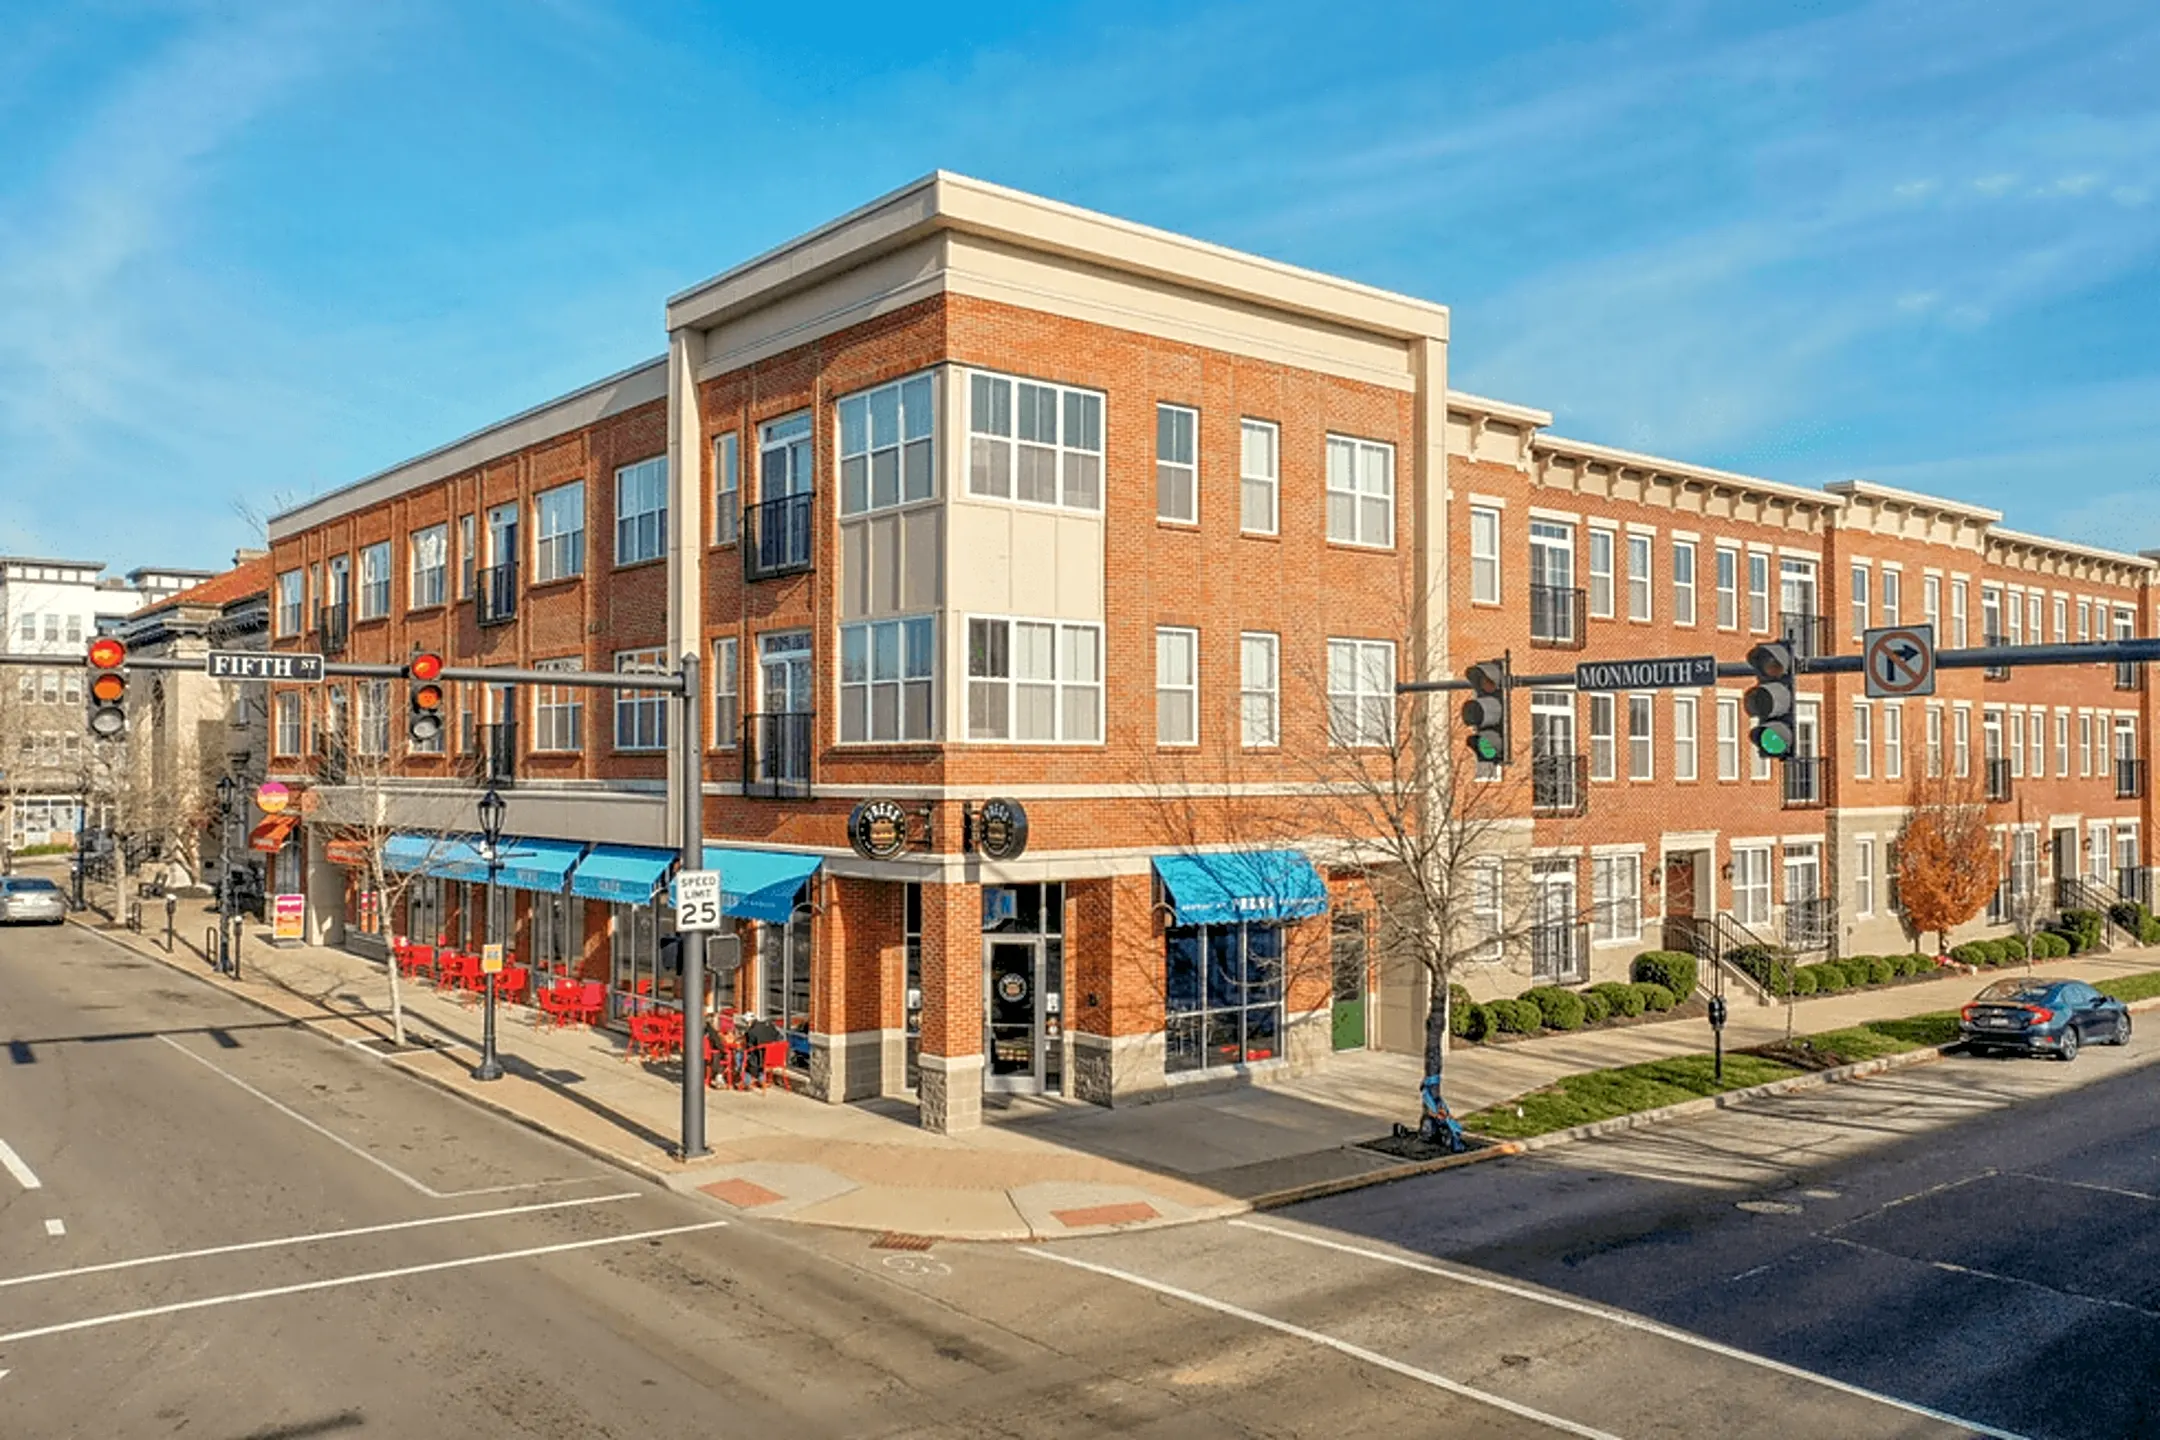 Building - Monmouth Row Apartments - Newport, KY